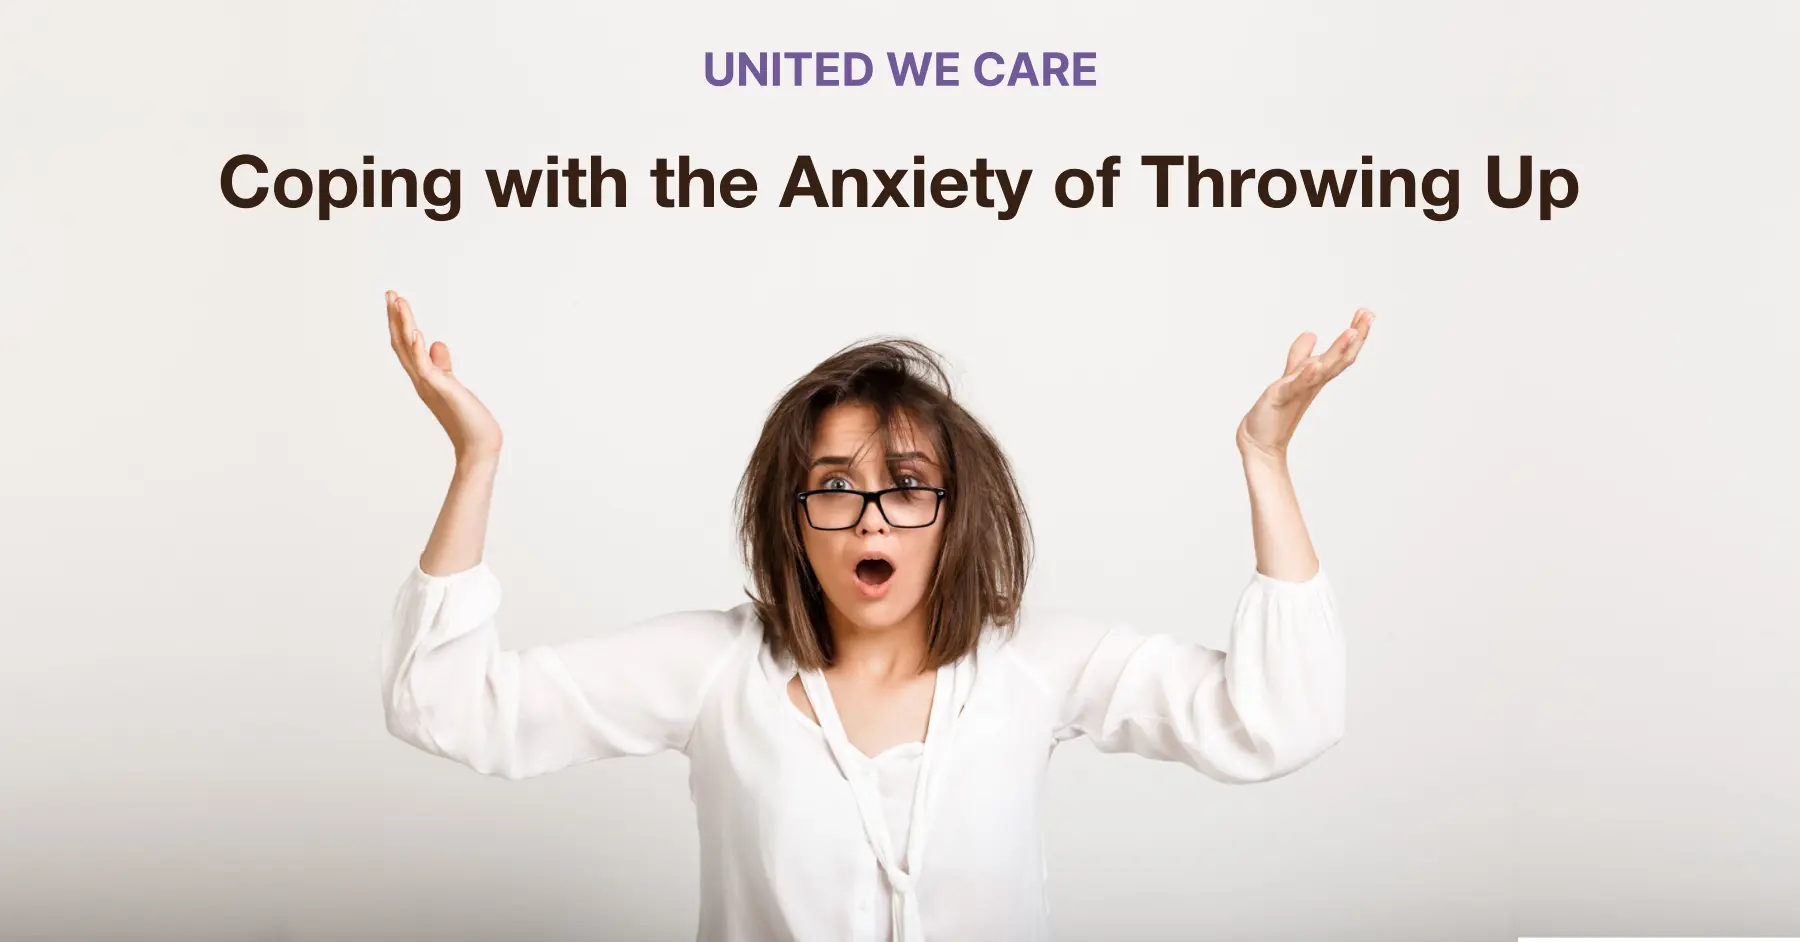 Coping with the Anxiety of Throwing Up